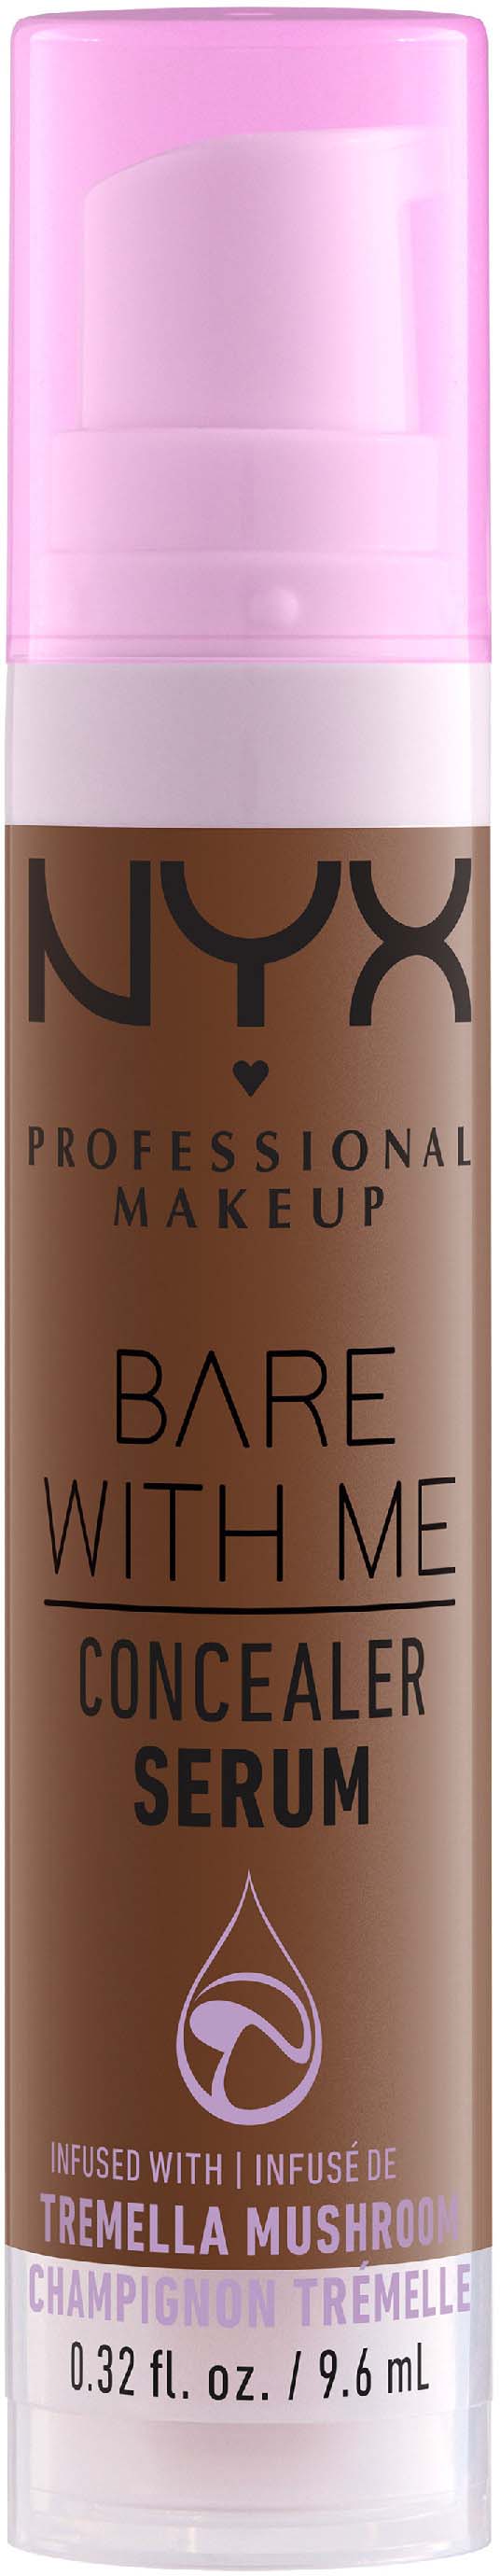 With Concealer Serum Bare MAKEUP NYX PROFESSIONAL Me Rich